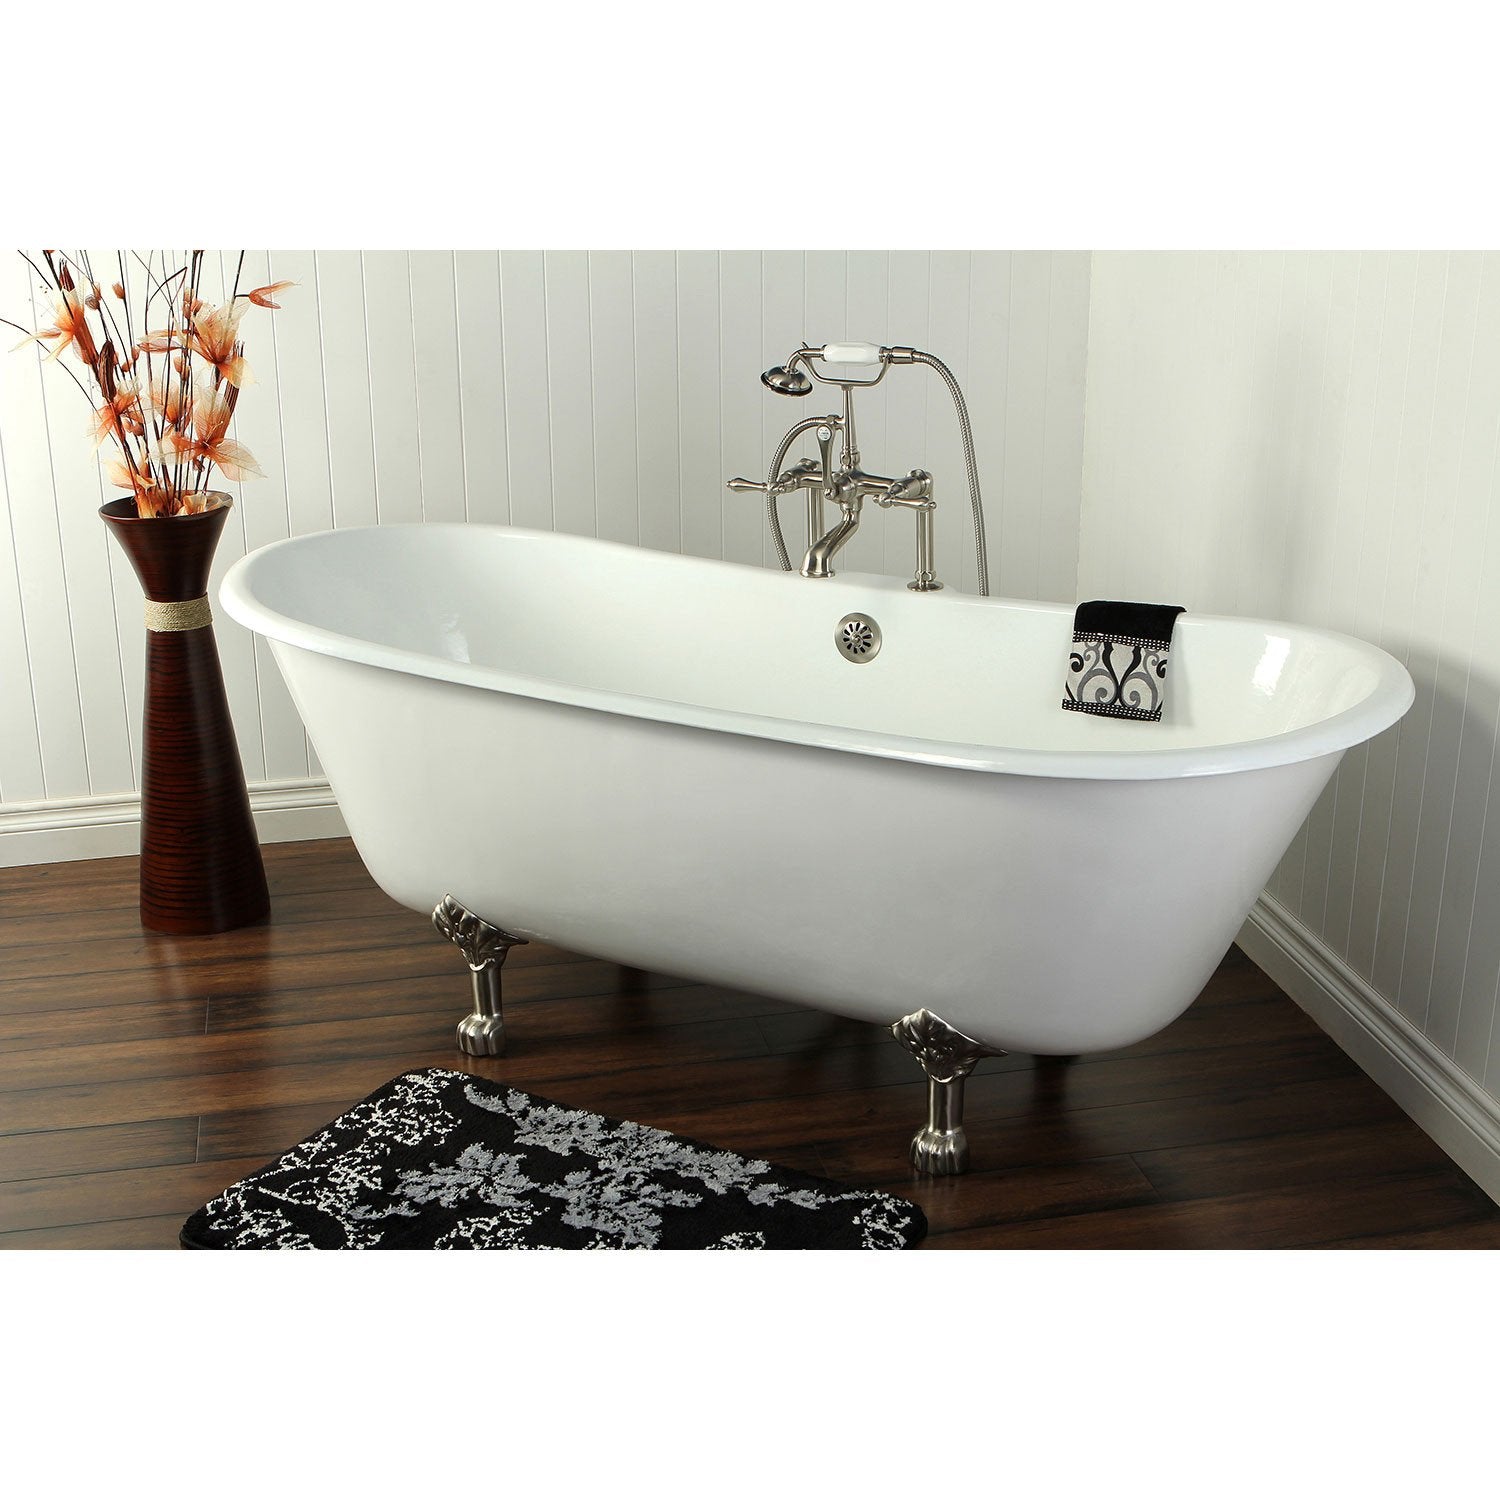 67 Cast Iron Slipper Clawfoot Tub And Satin Nickel Tub Hardware Package Ctp04